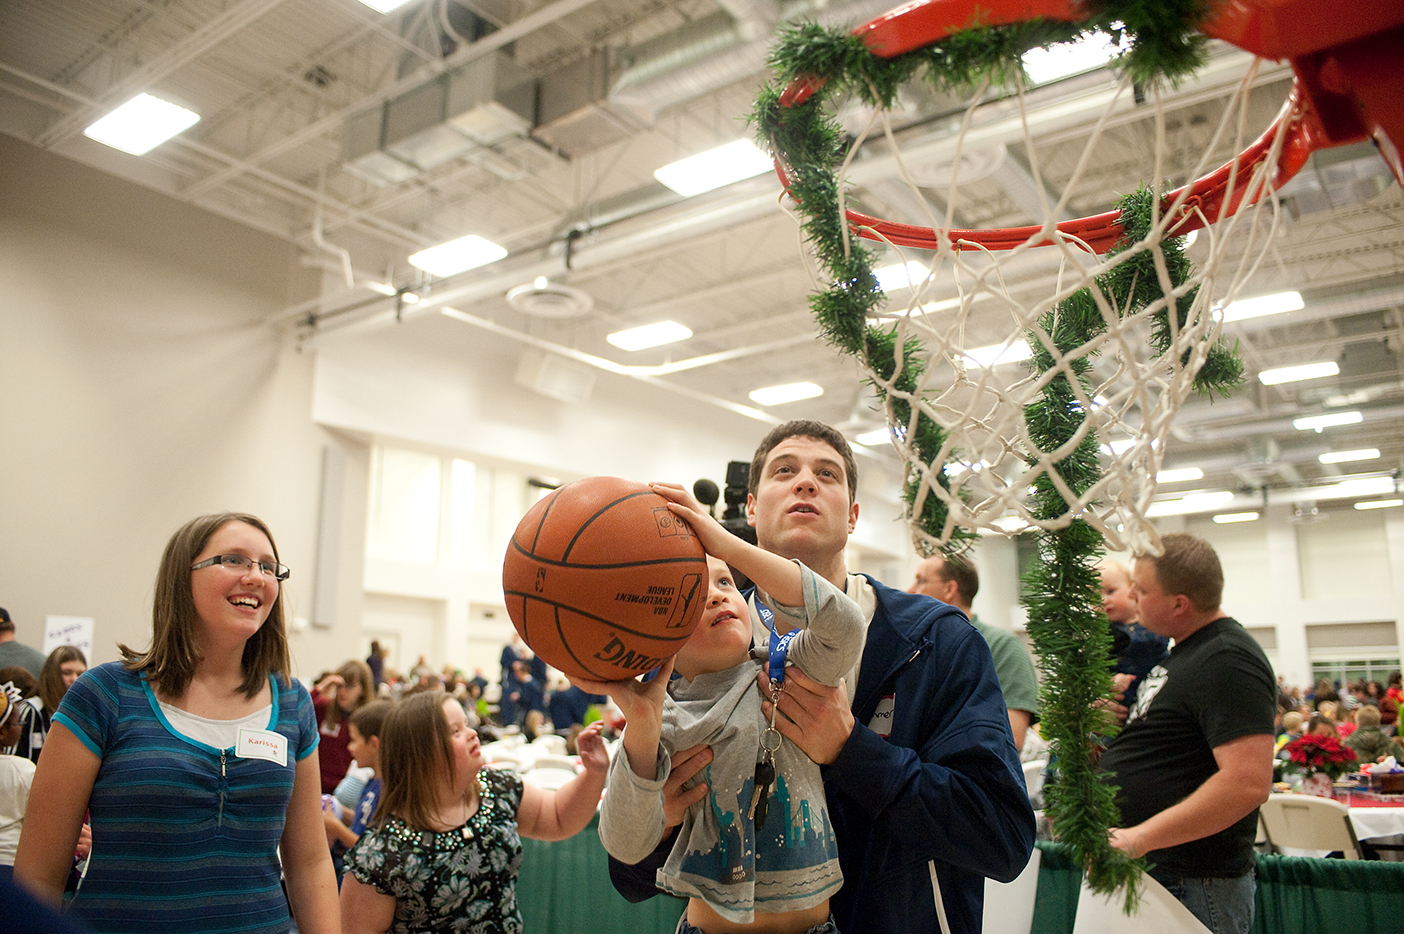 Jimmer Fredette lifts up a small boy to make a shot in a garland-decorated hoop as a woman watches.